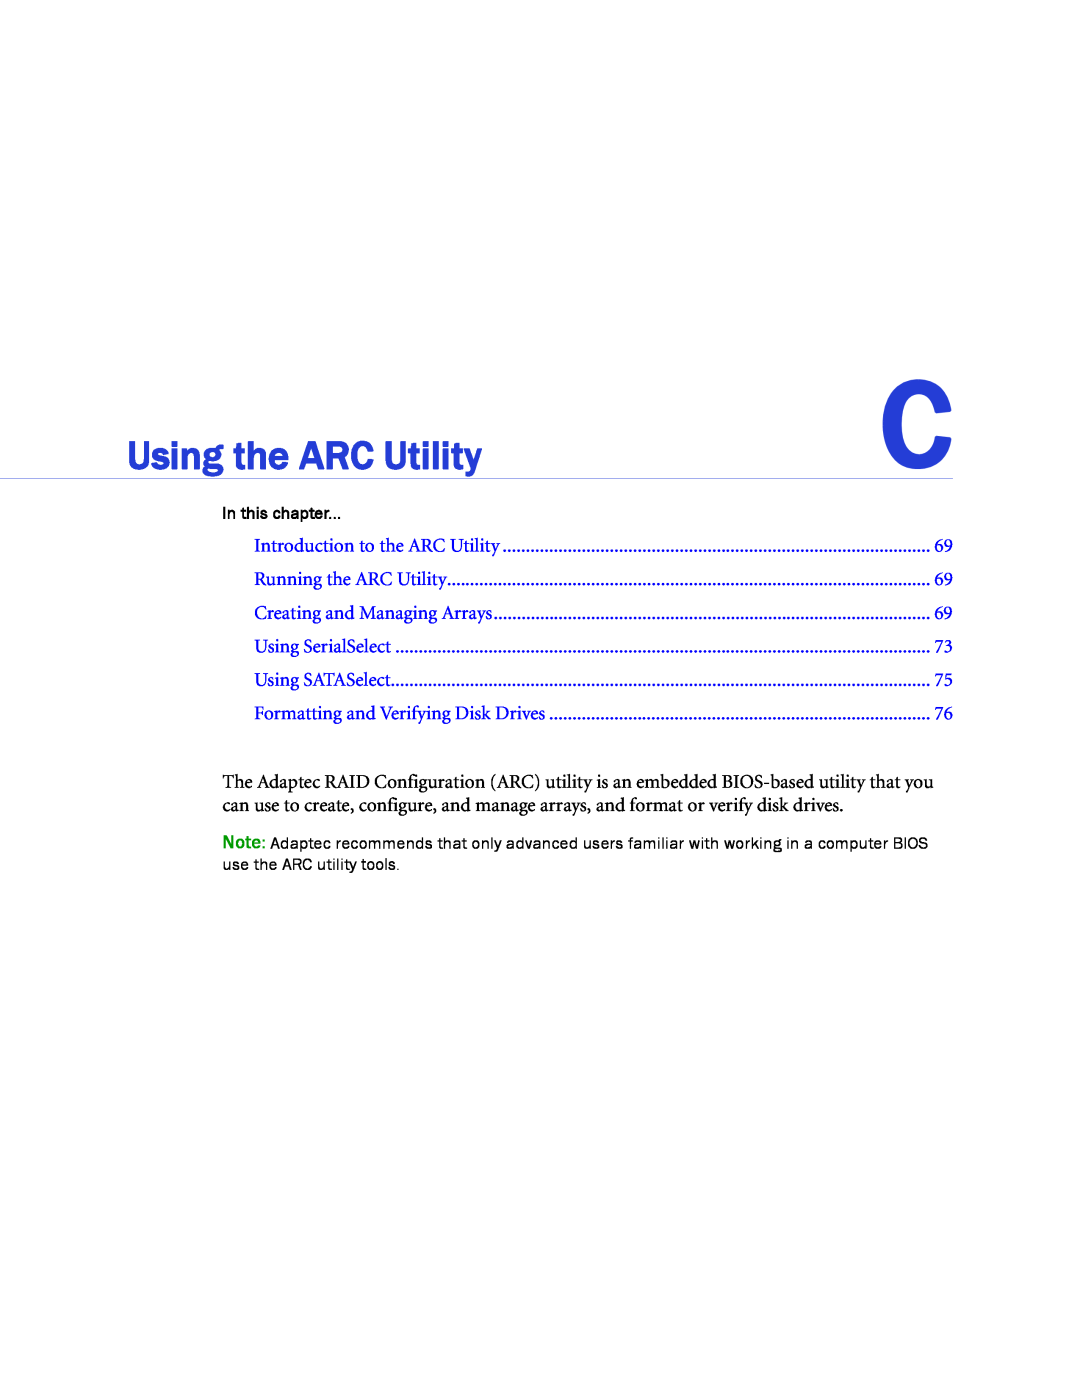 Adaptec 1420SA, 58300 Using the ARC Utility, In this chapter, Introduction to the ARC Utility, Running the ARC Utility 